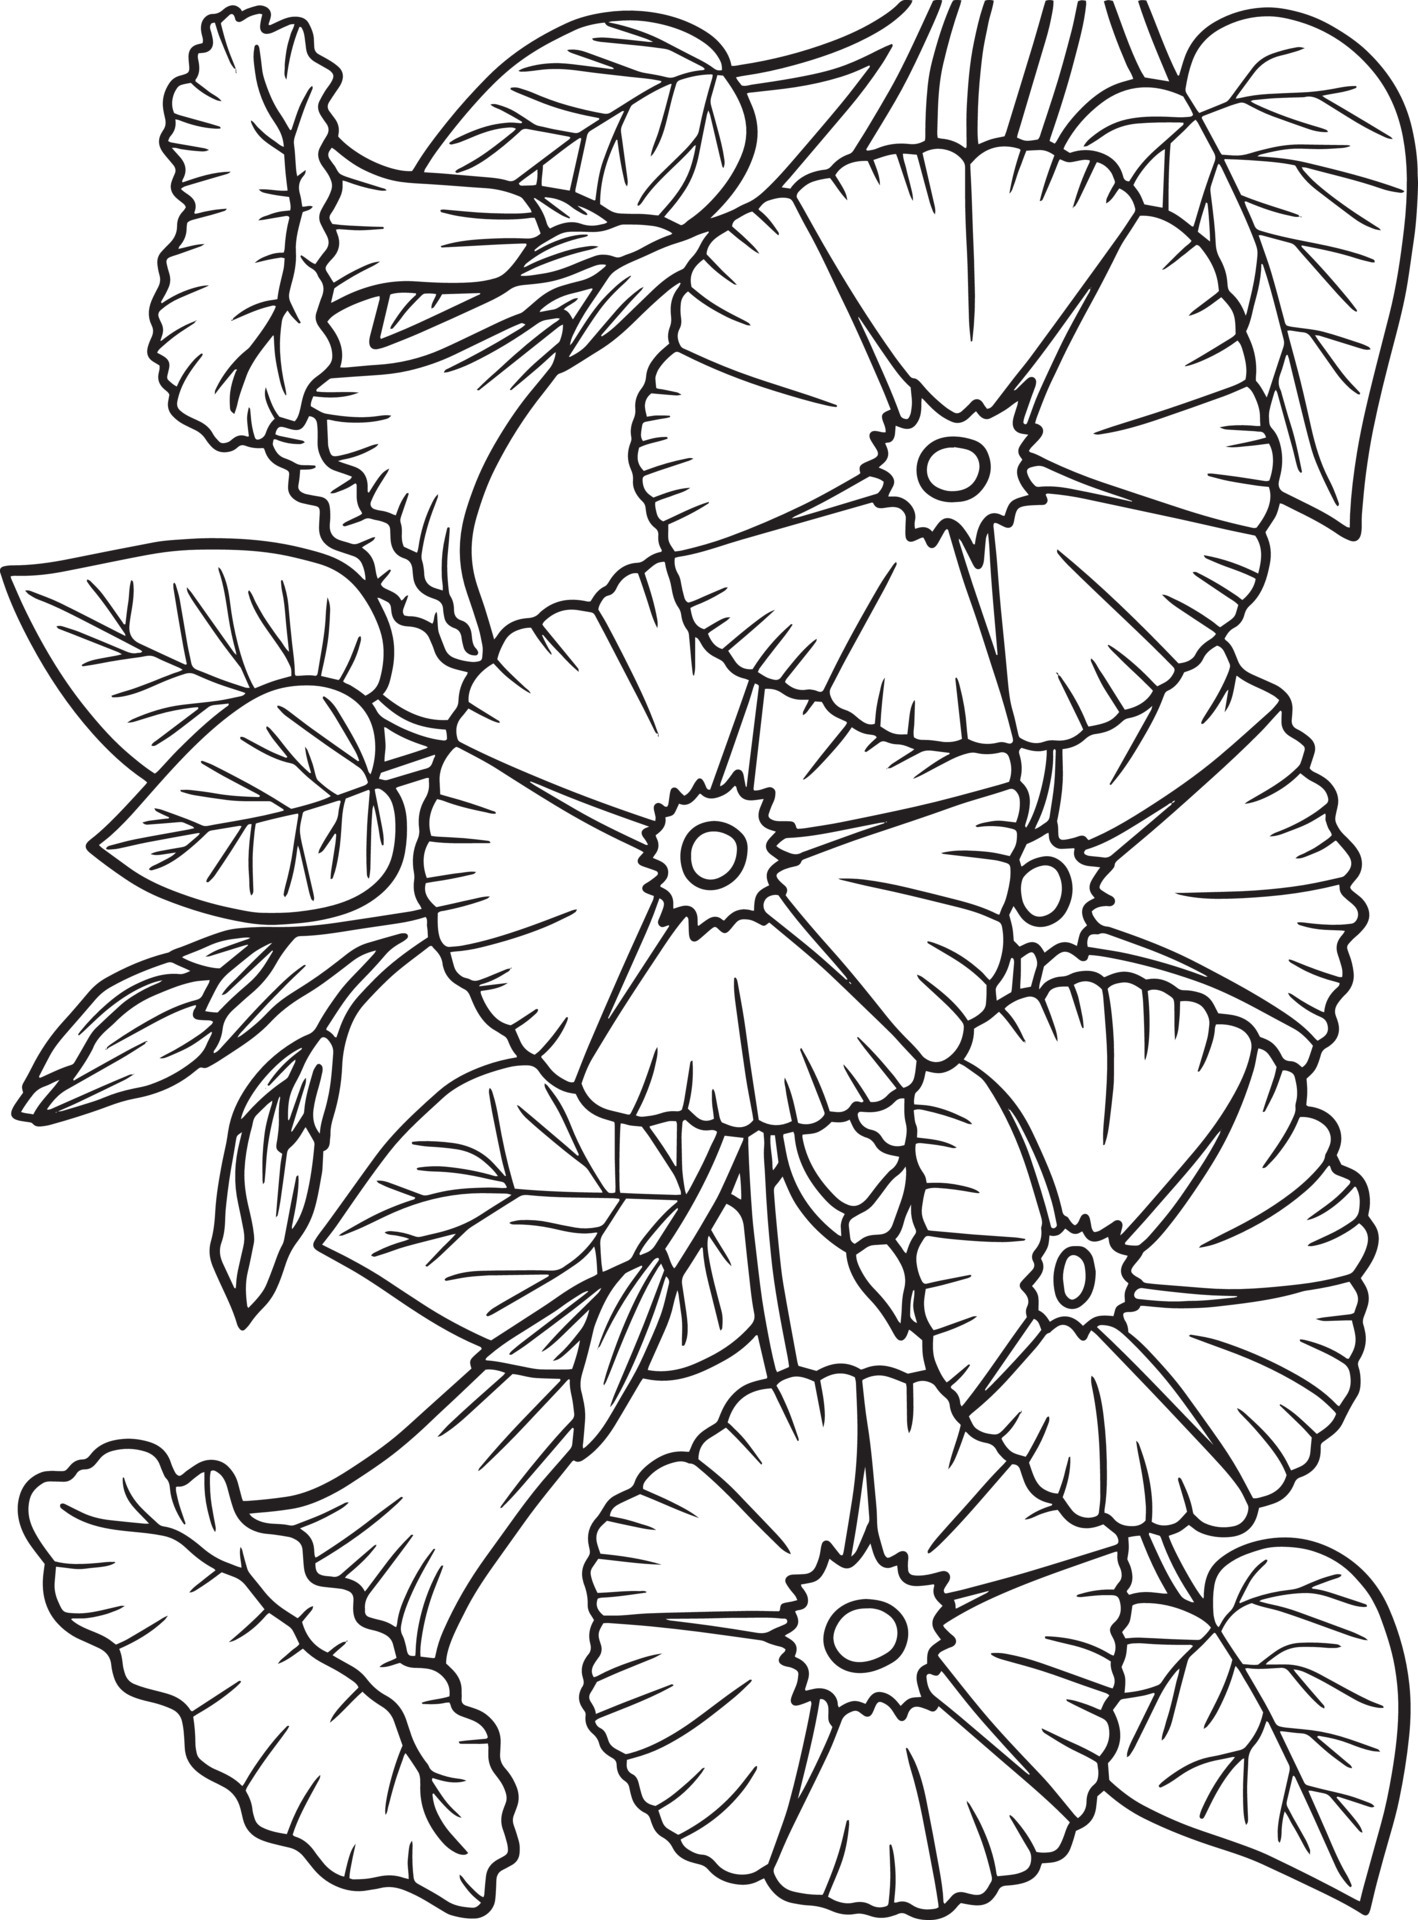 Morning Glory Flower Coloring Page for Adults 7066680 Vector Art at Vecteezy